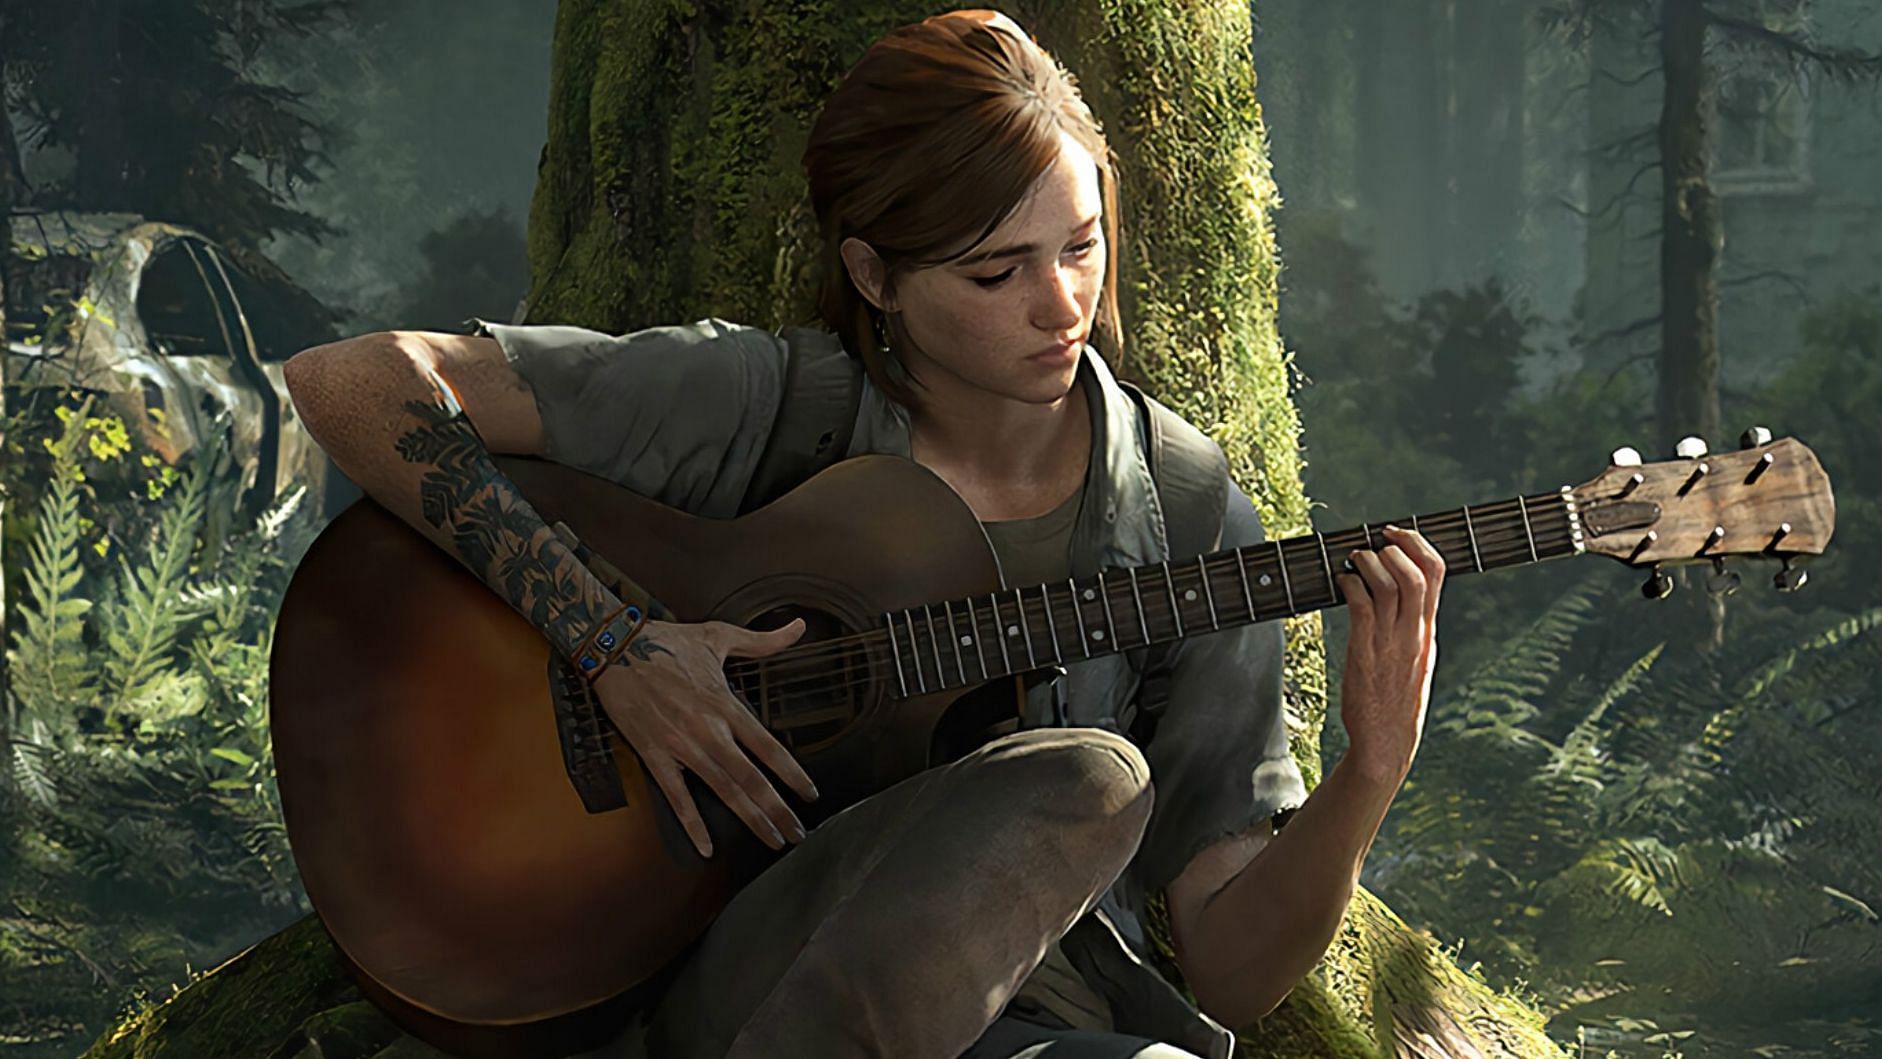 Ellie playing Guitar, The Last of Us: Part 2 (Image via Naughty Dog)